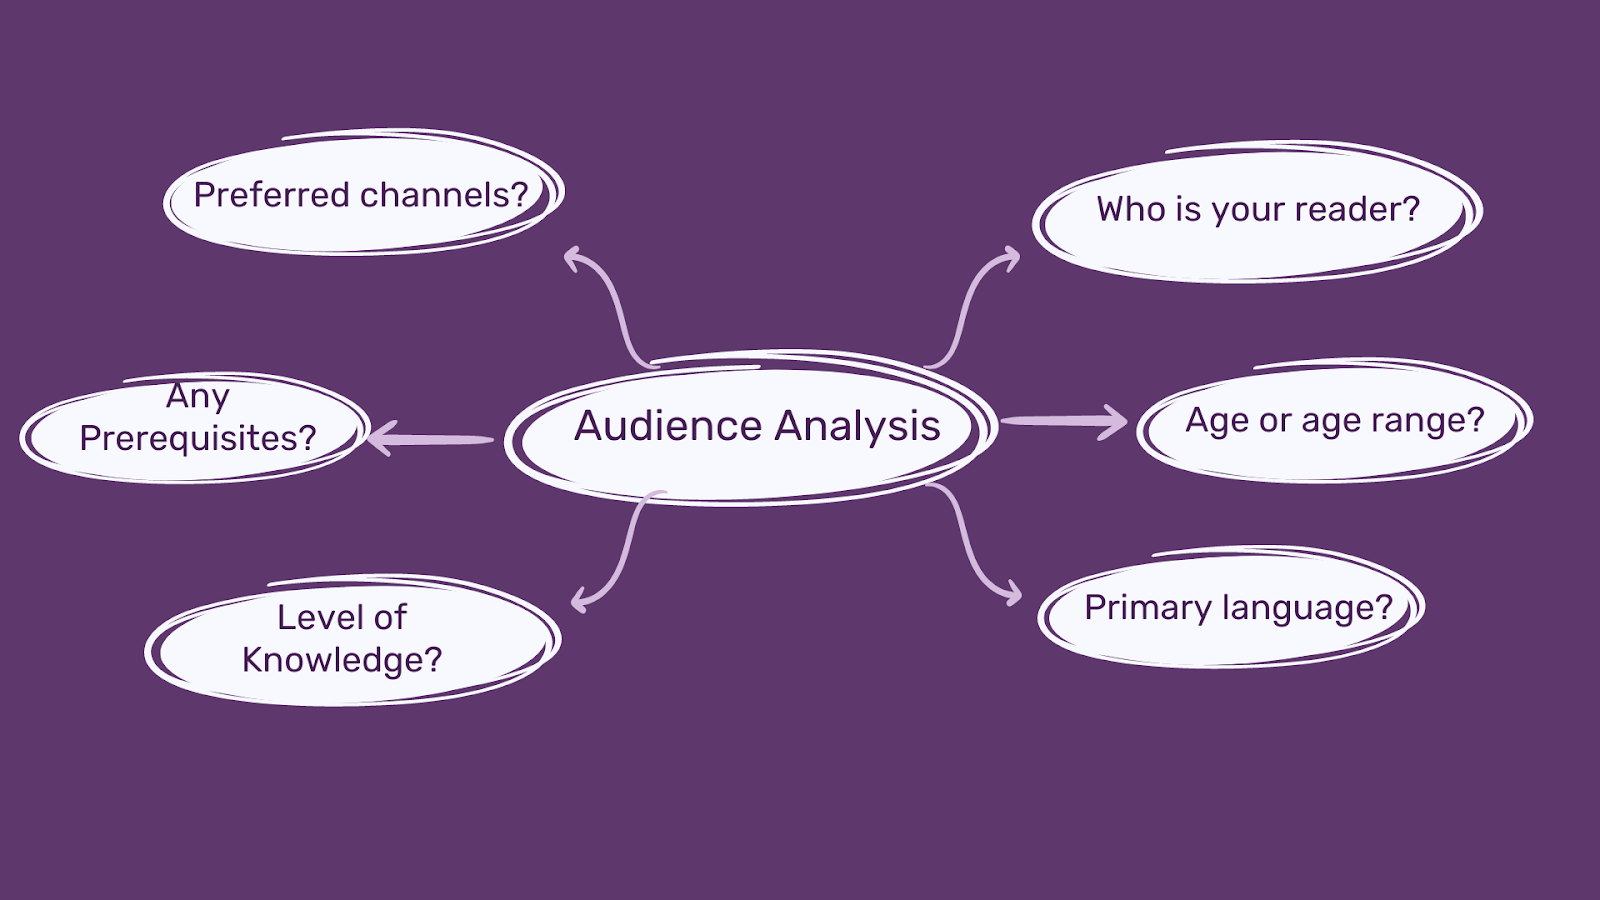 understanding your audience - audience analysis